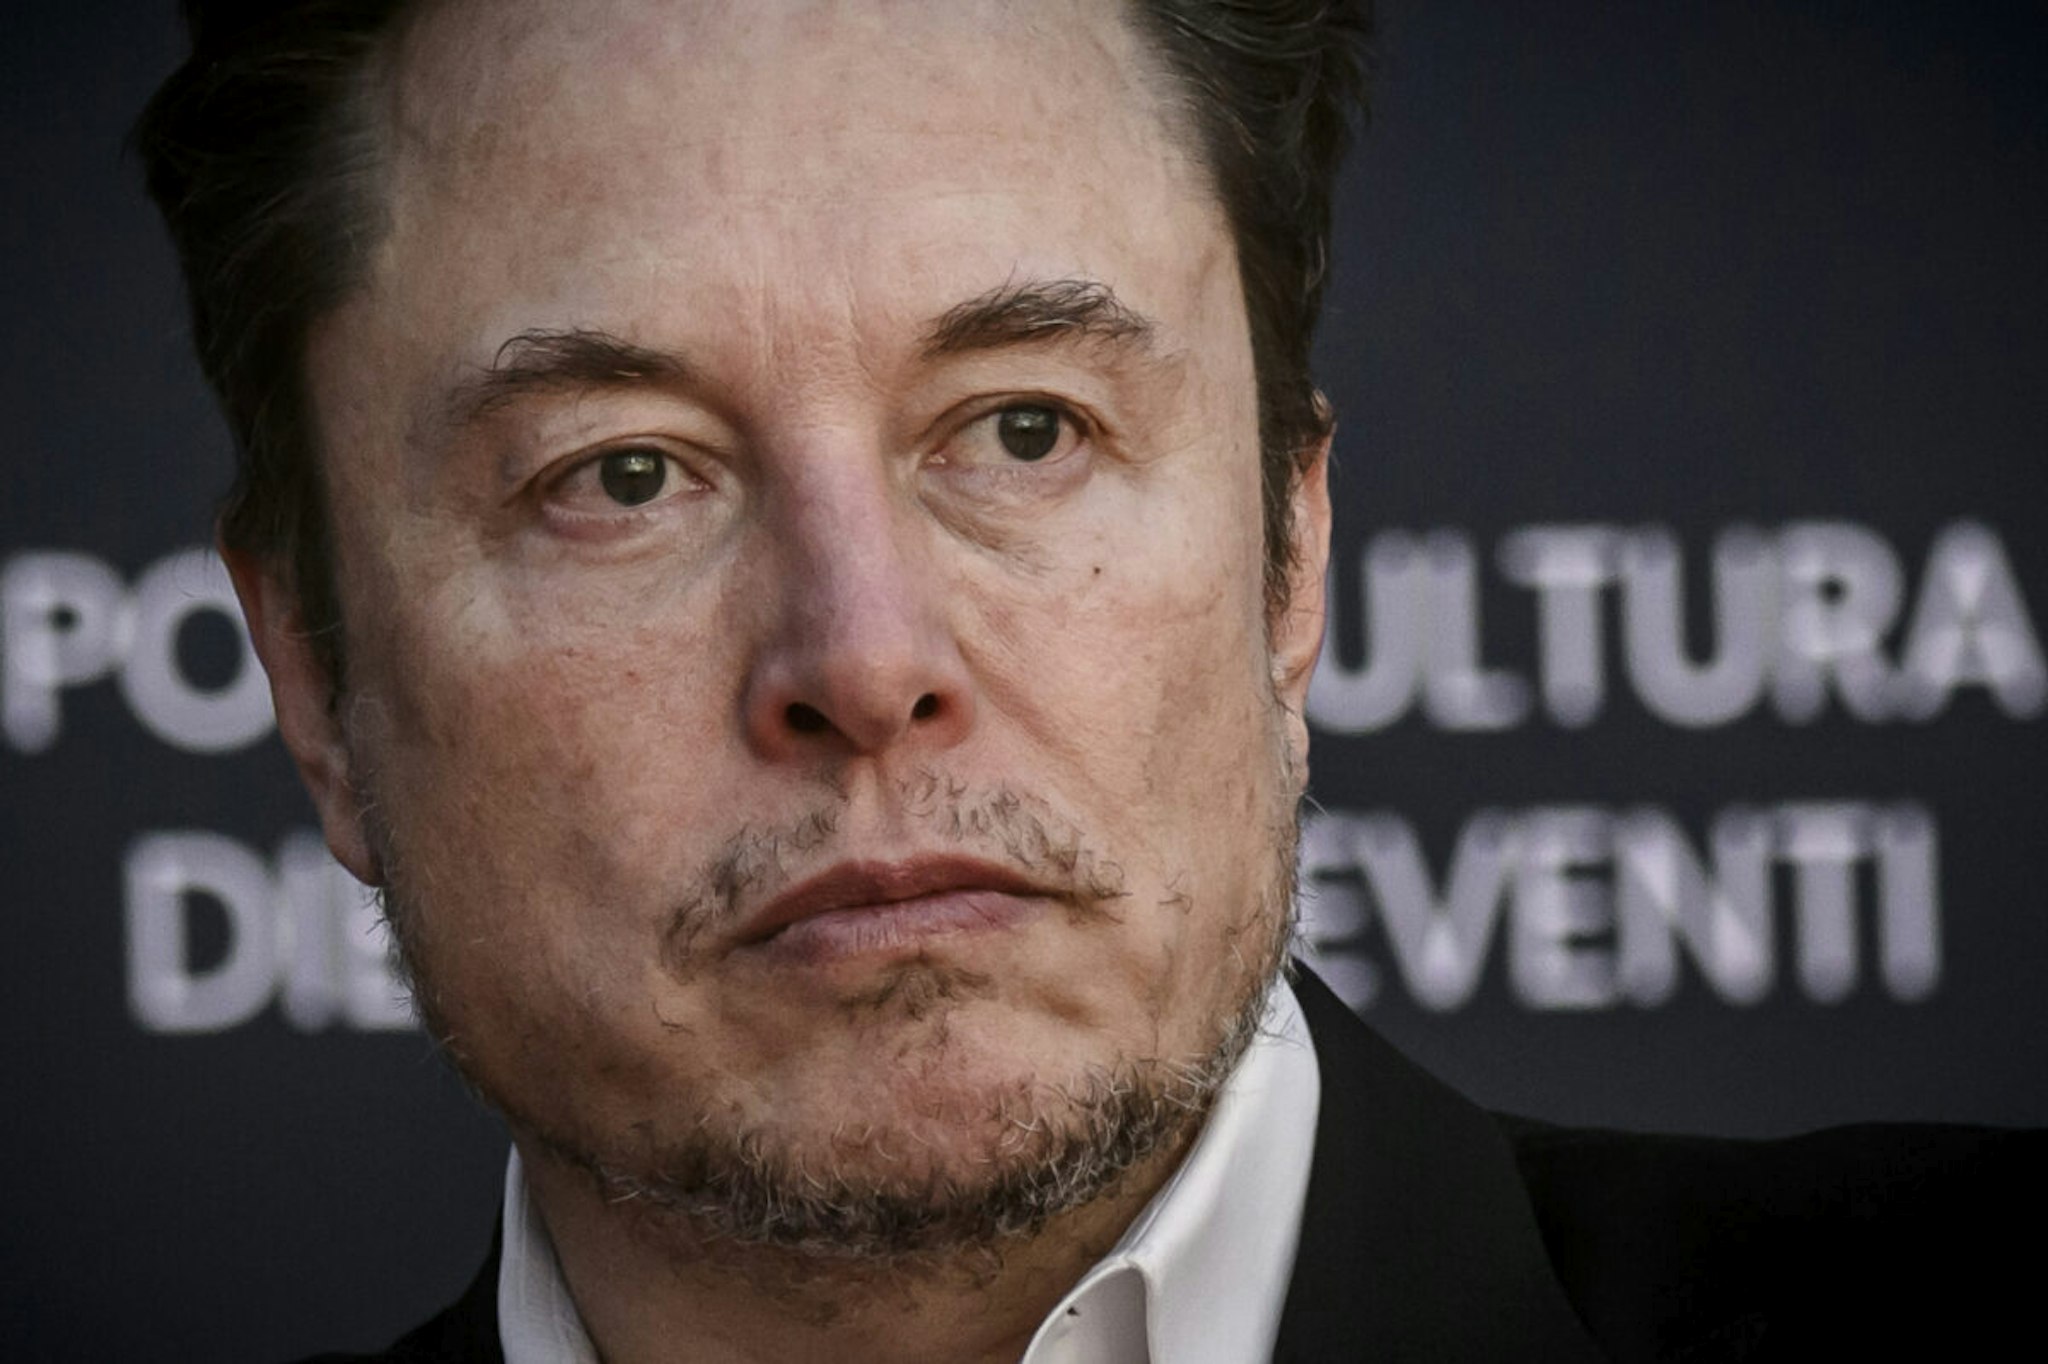 ROME, ITALY - DECEMBER 15: Elon Musk, chief executive officer of Tesla Inc and X (formerly Twitter) Ceo speaks at the Atreju political convention organized by militants of Fratelli d'Italia (Brothers of Italy), on December 15, 2023 in Rome, Italy. Italian Prime Minister Giorgia Meloni's right-wing political party organised a four-day political festival in the Italian capital.